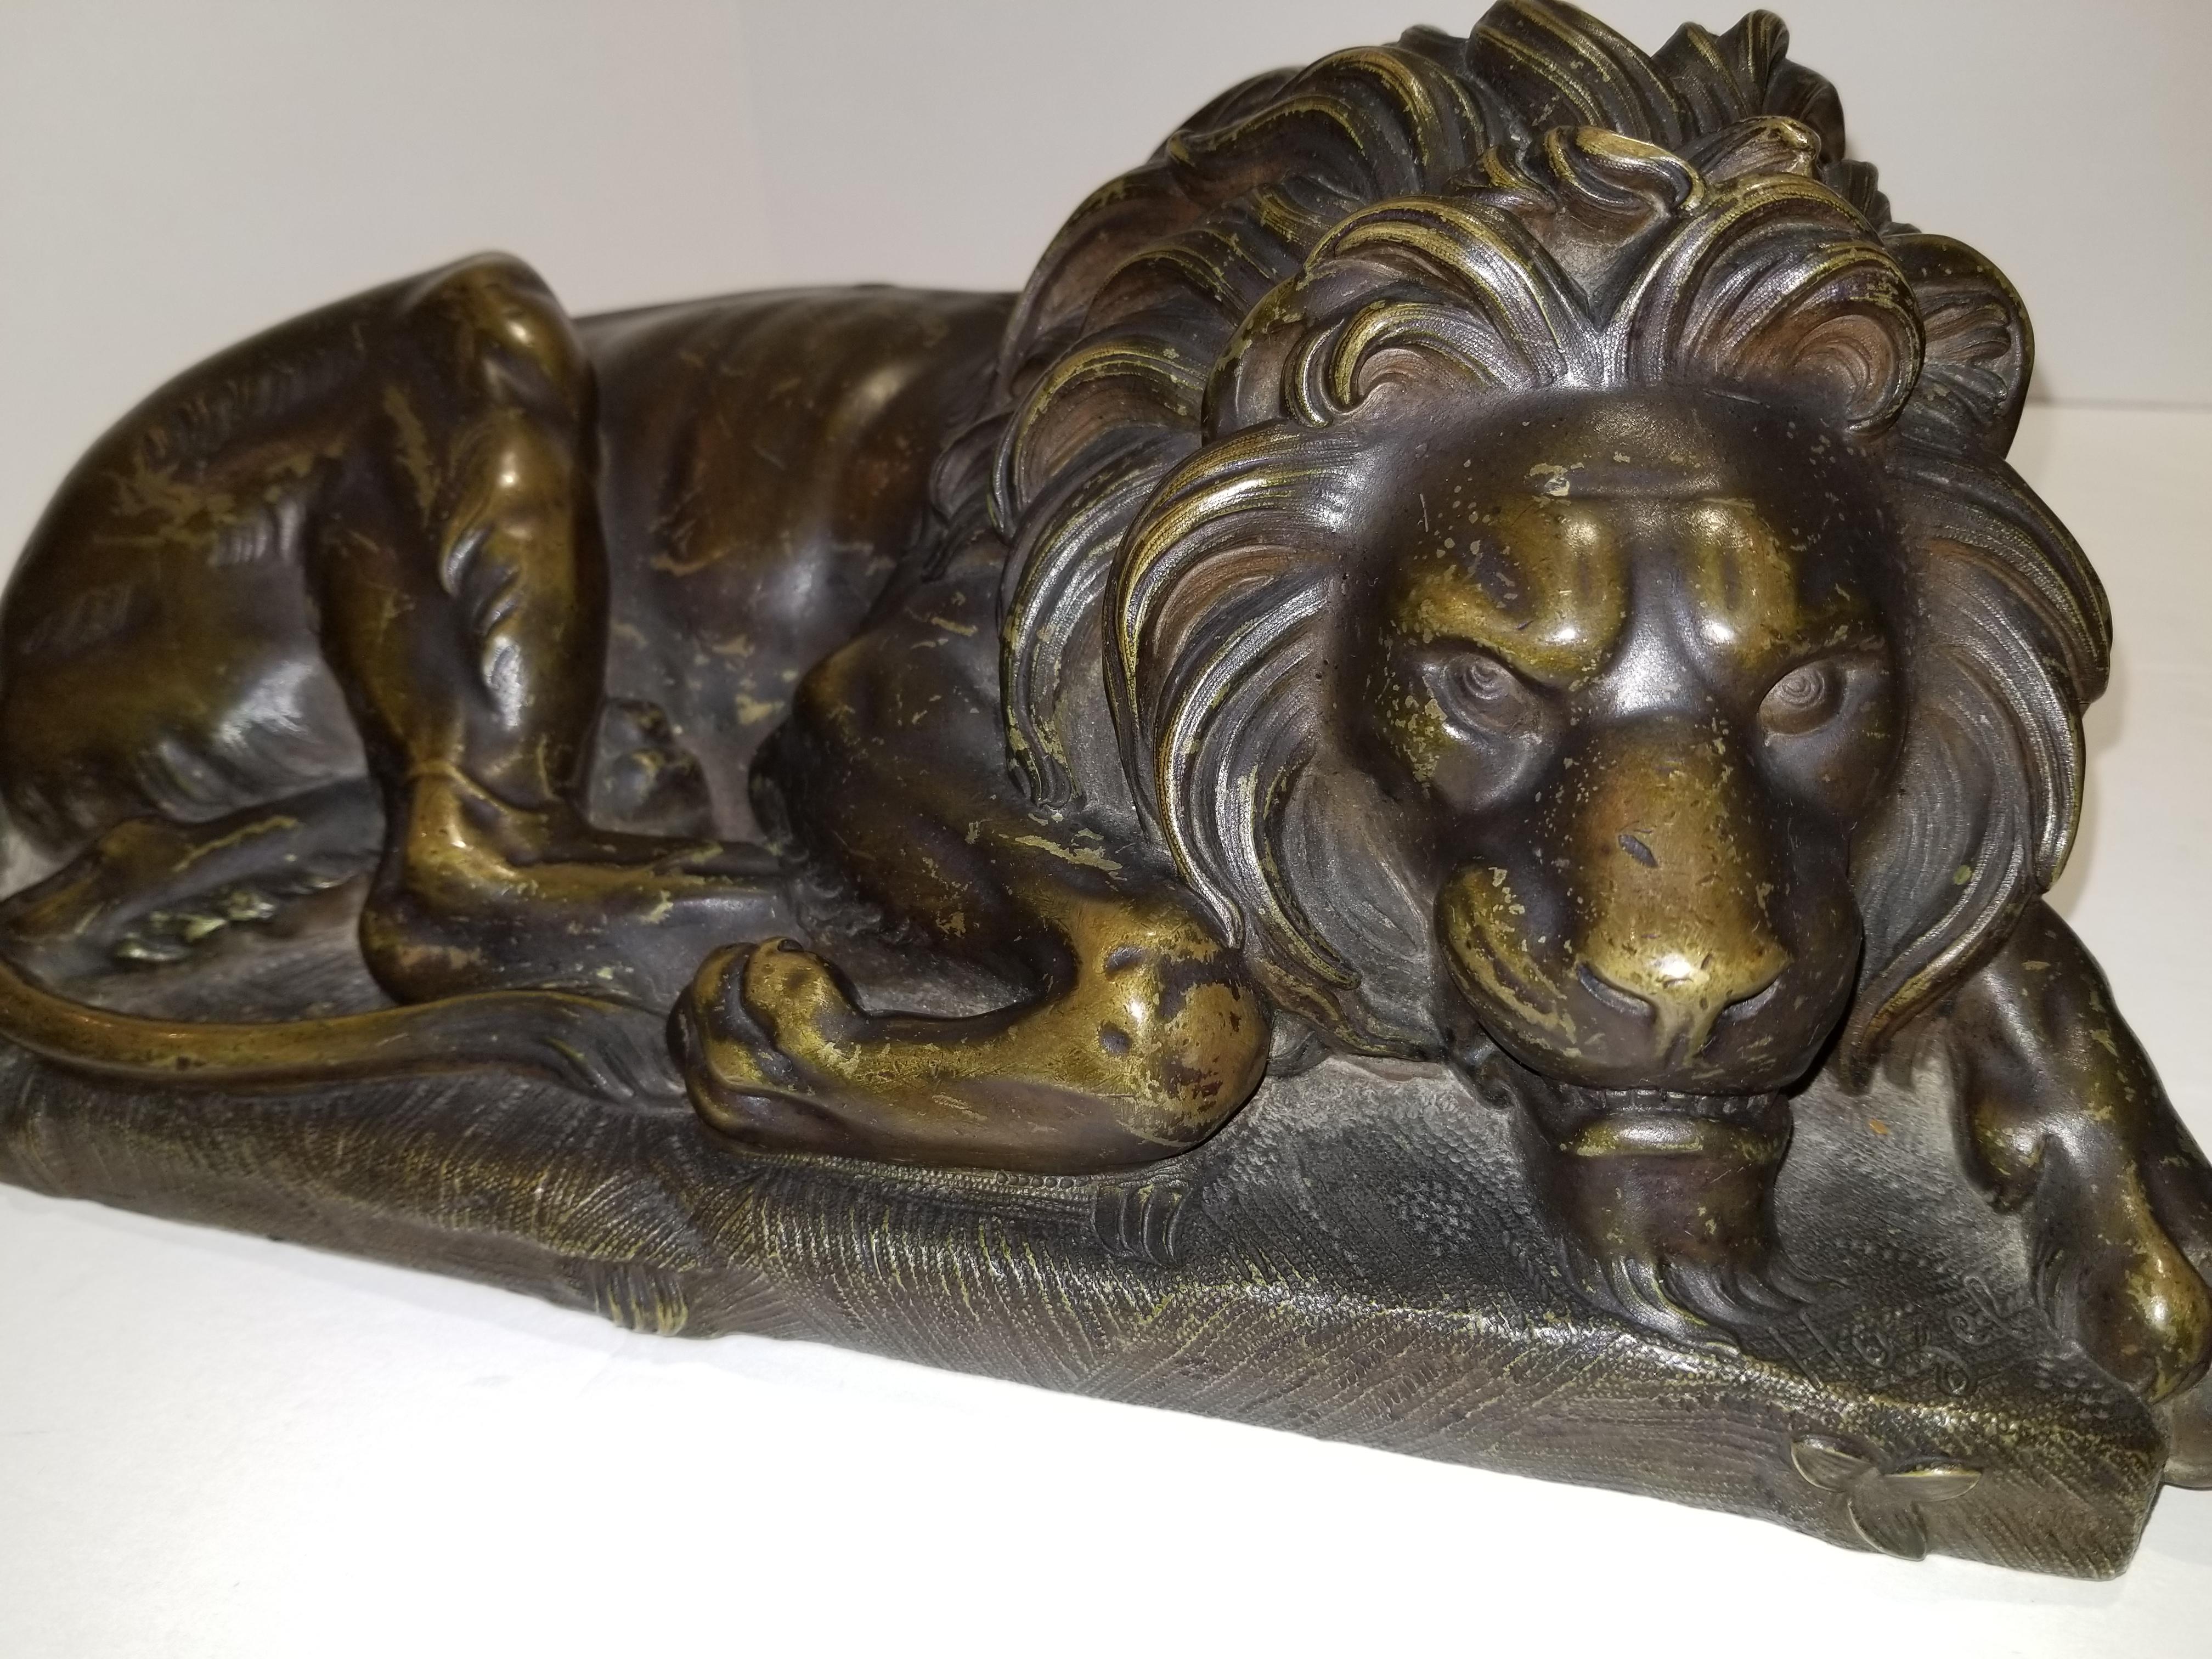 Beautiful pair of patinated resting lions, Signed by Bernoux and Huzel. This magnificent pair of resting lions have been exceptionally hand-casted/chiseled and patinated by the exceptional sculpture Huzel, in the design of Bernoux. The detail placed